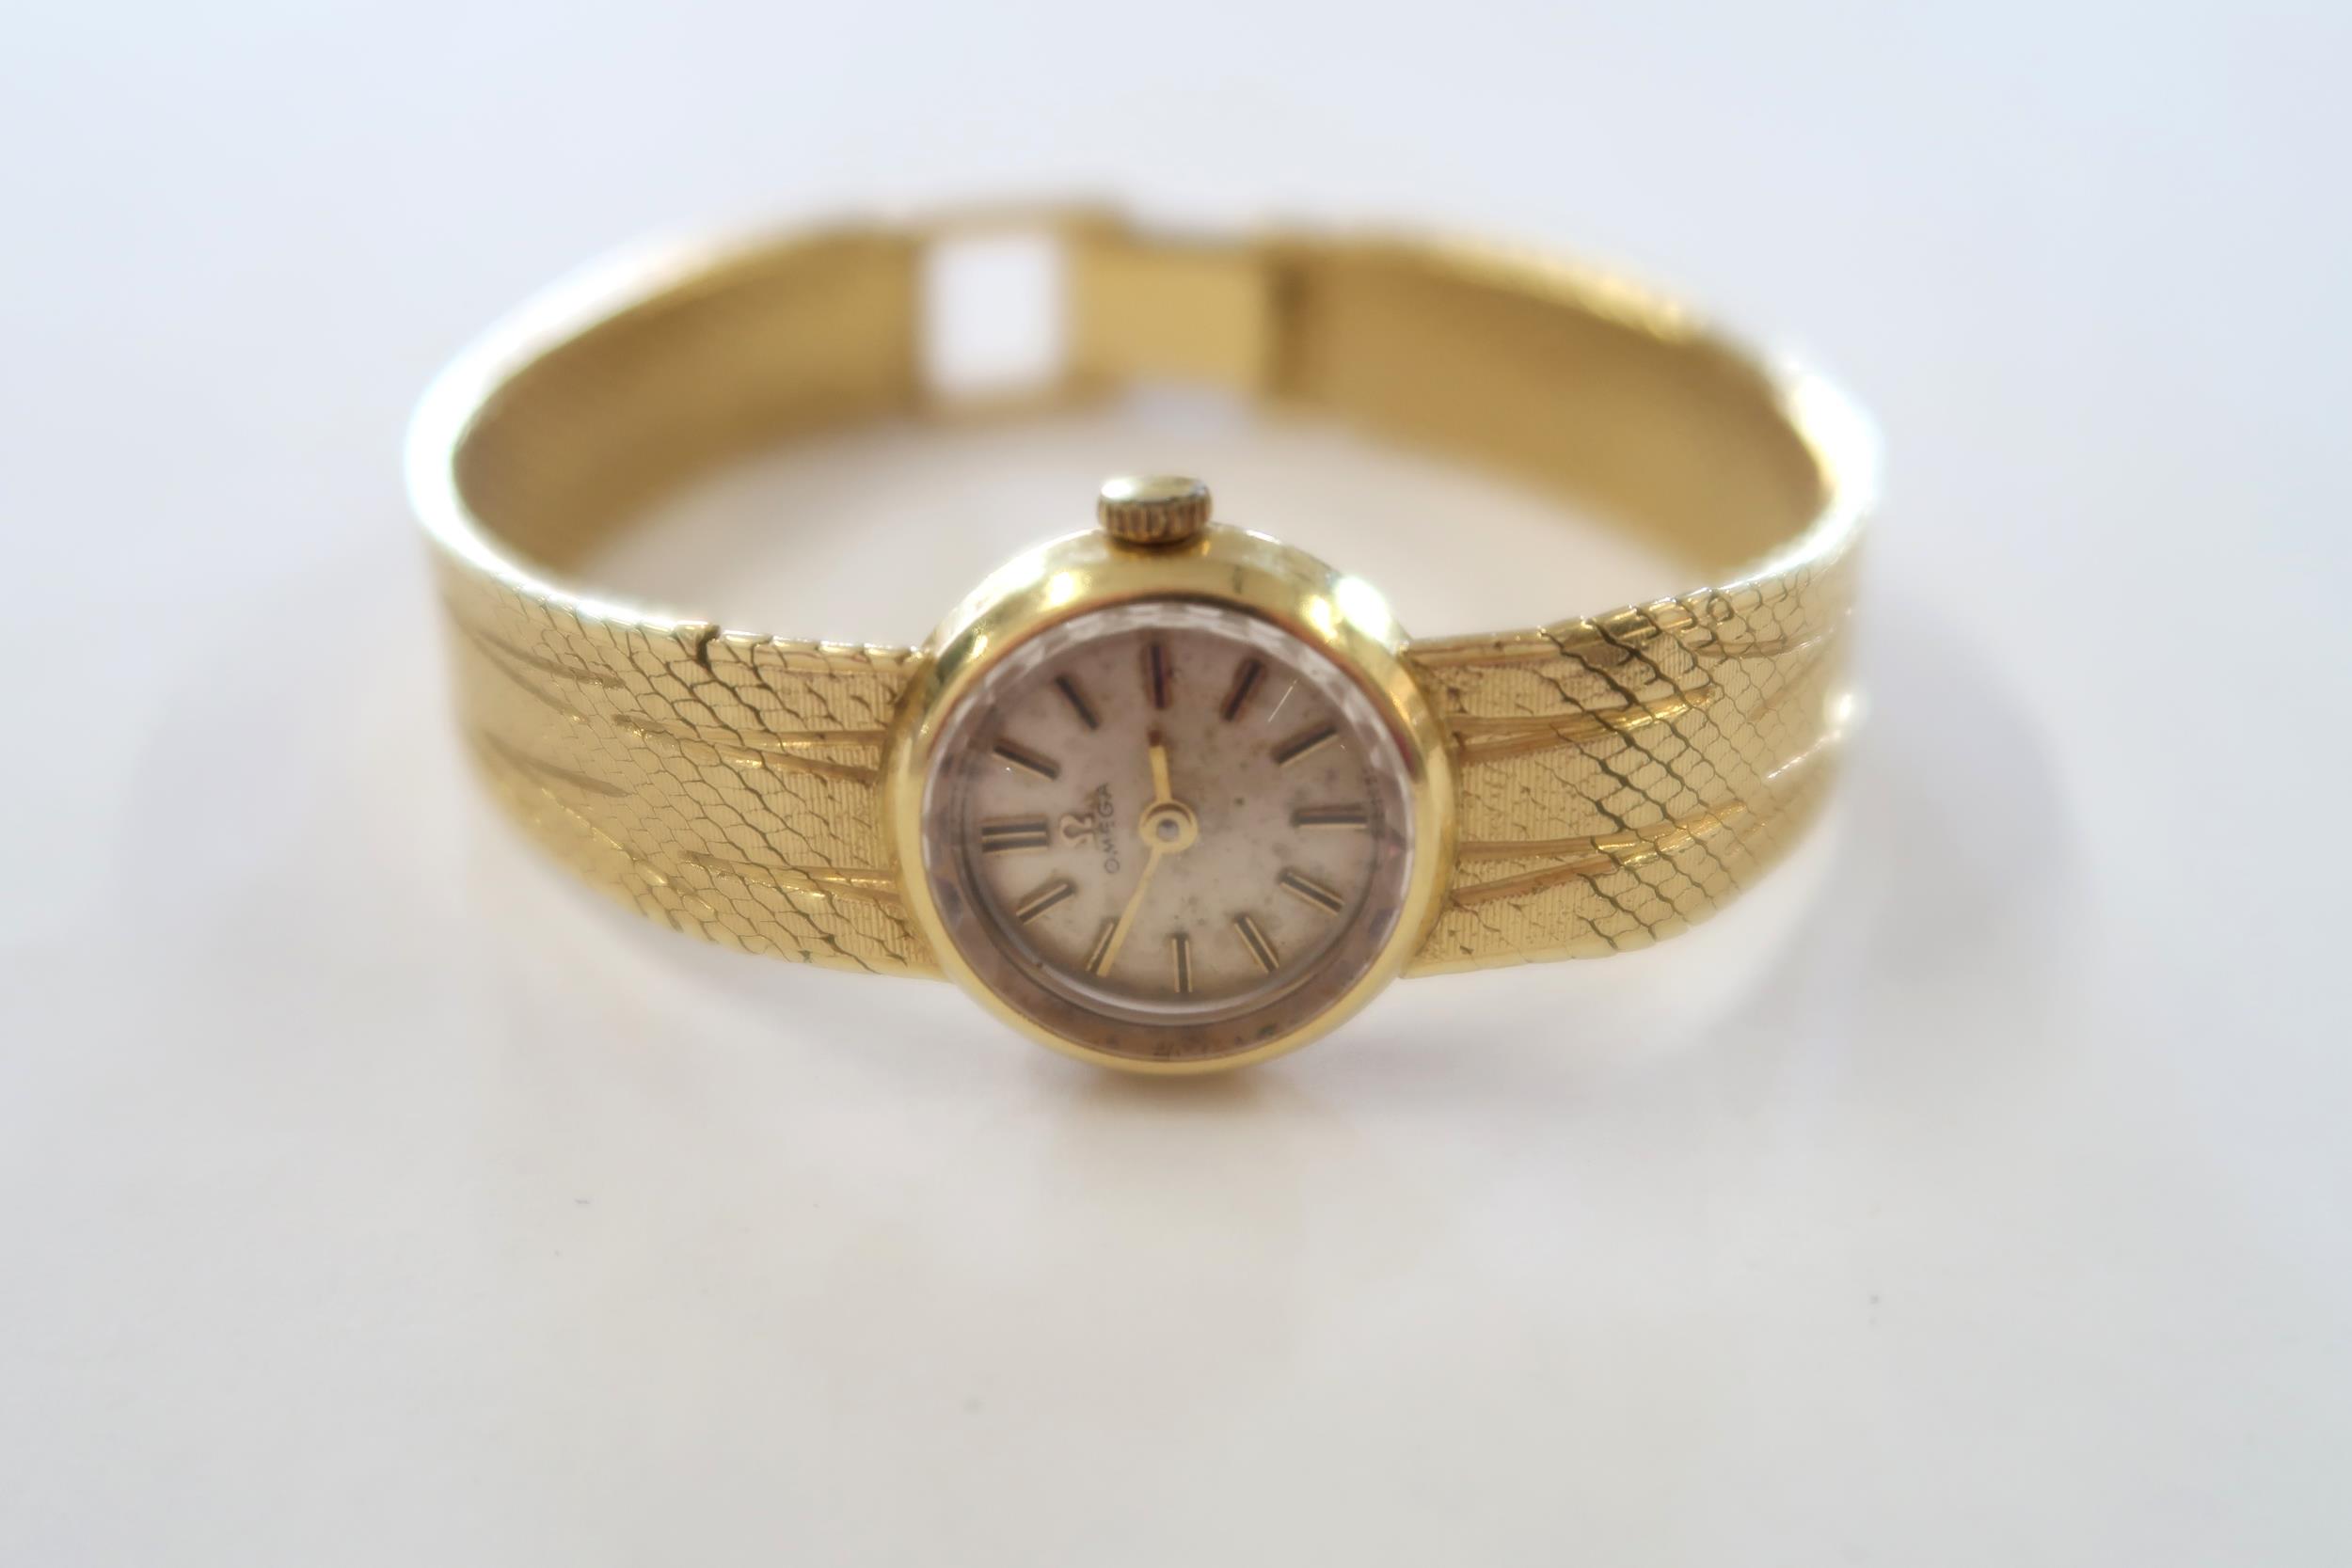 A ladies Omega wristwatch with an 18ct gold strap - approx weight 37.9 grams - Image 4 of 4